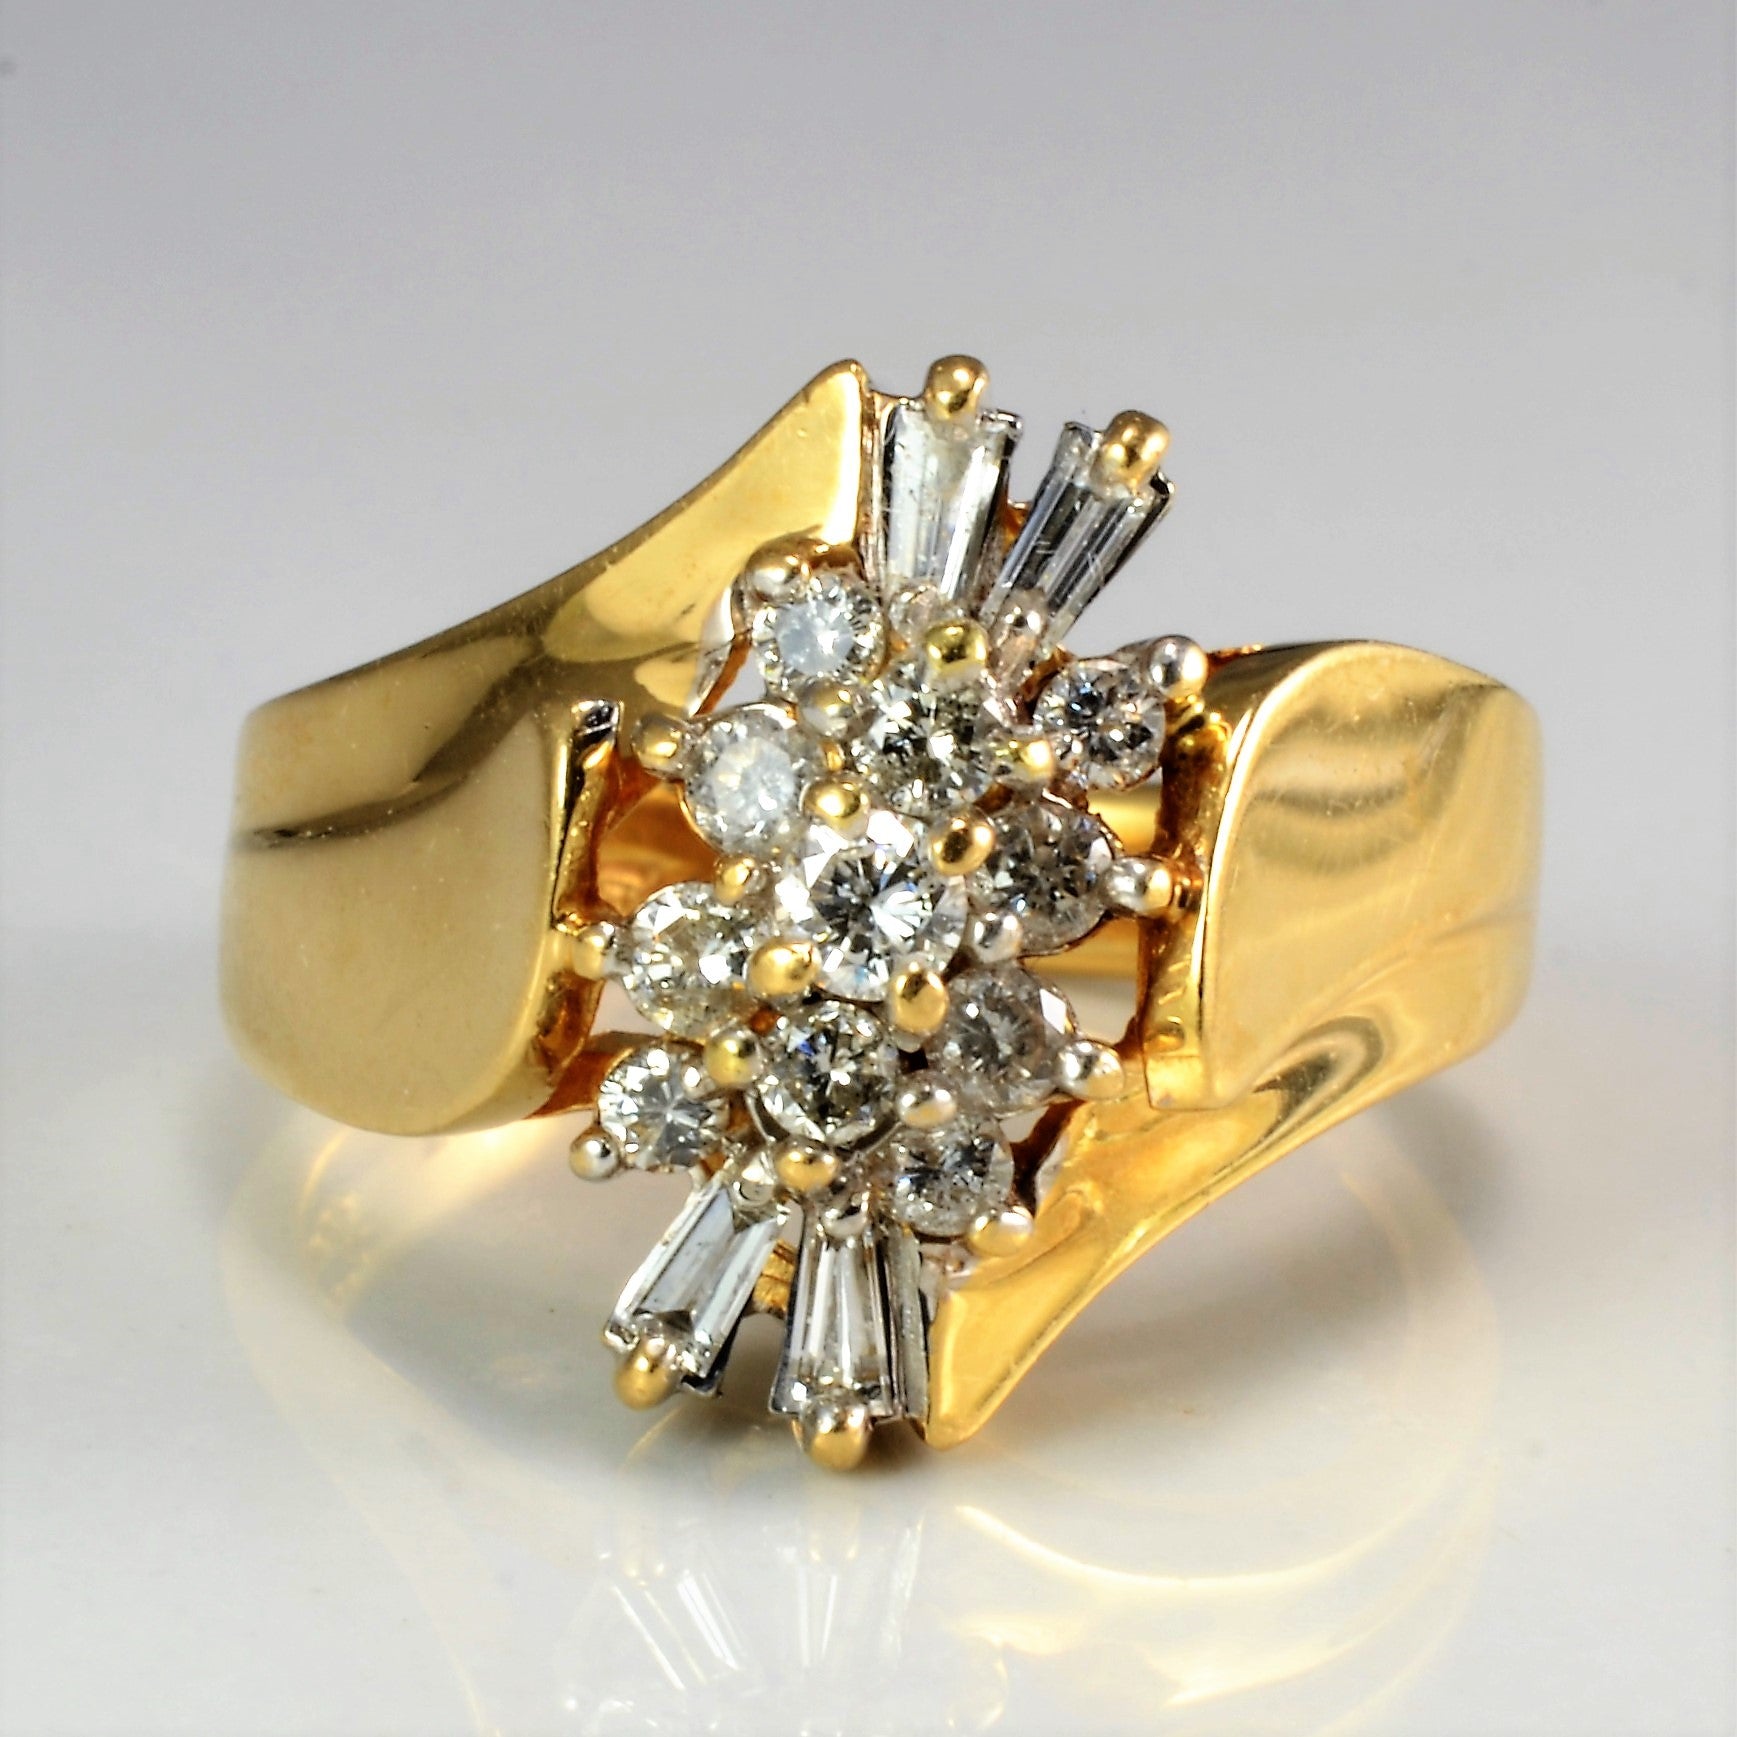 Bypass Cluster Diamond Wide Ladies Ring | 0.41 ctw, SZ 6 |